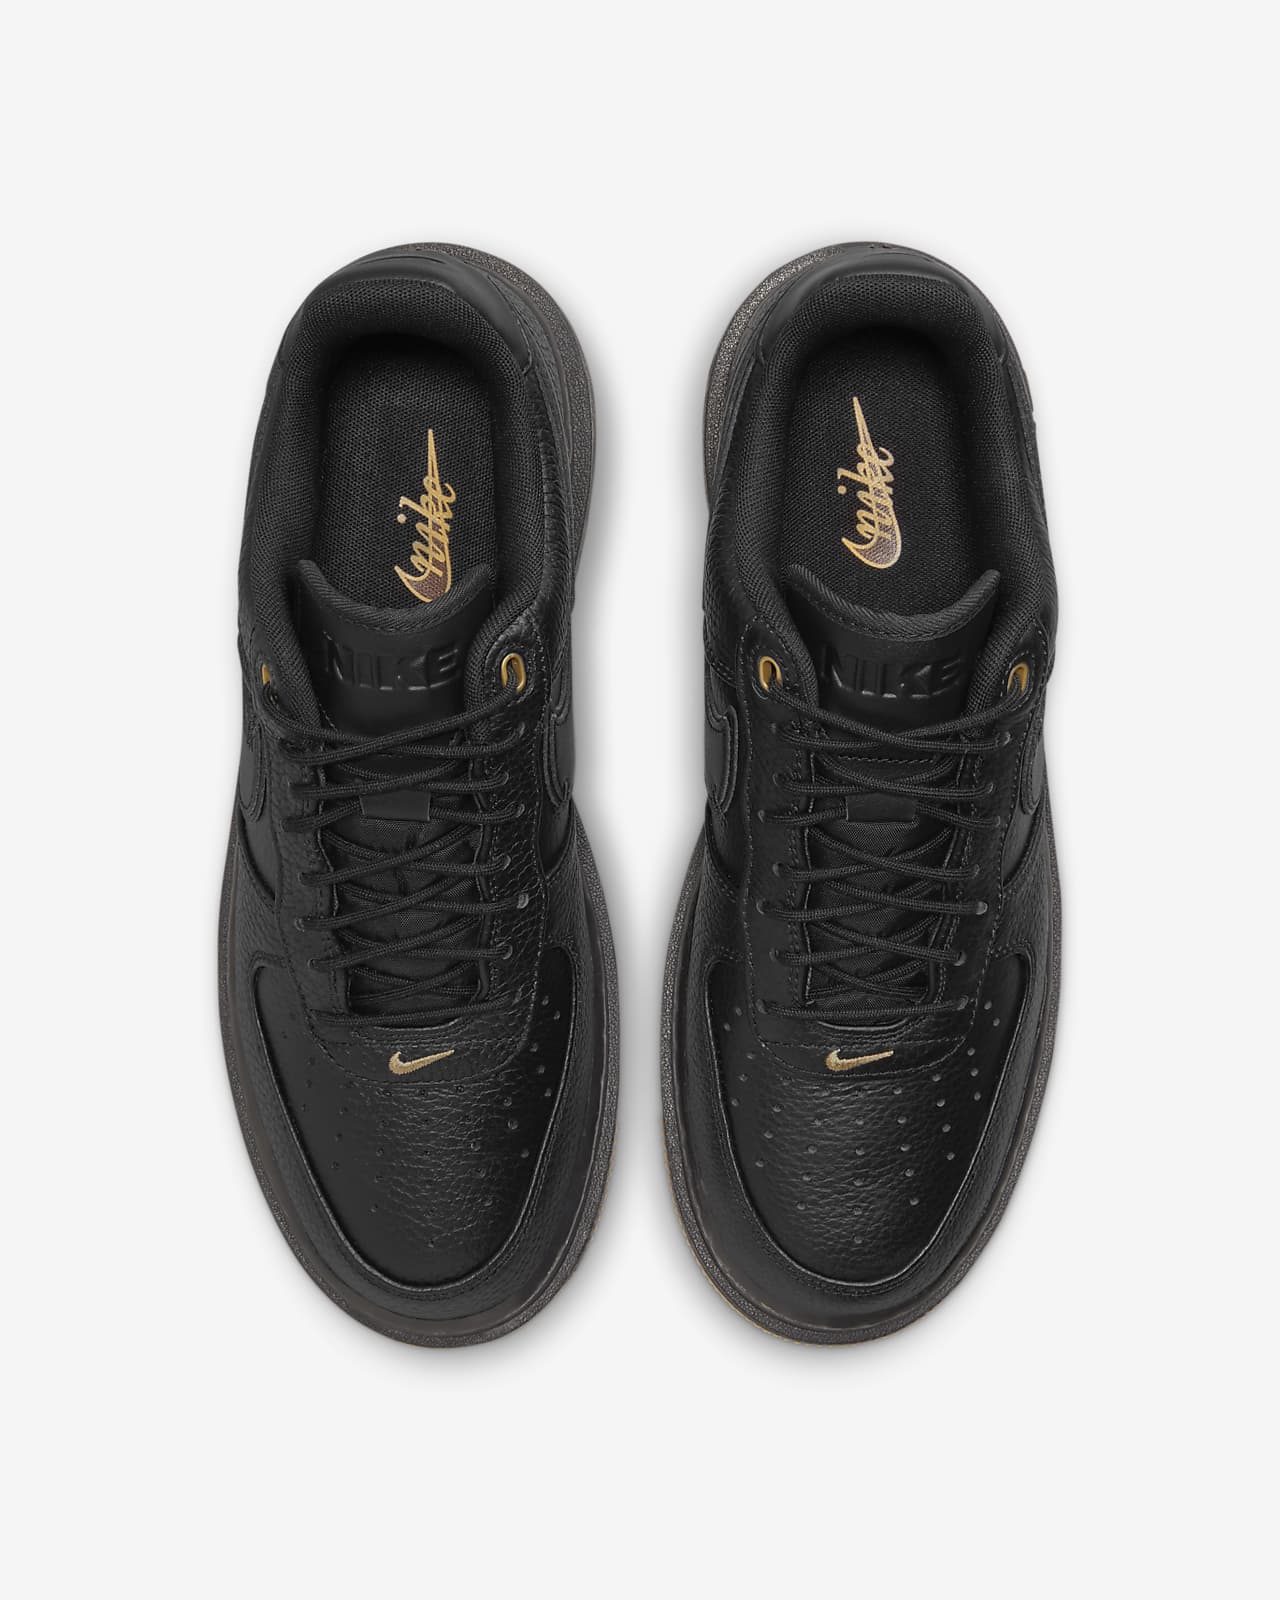 Nike Air Force 1 Luxe Men's Shoes